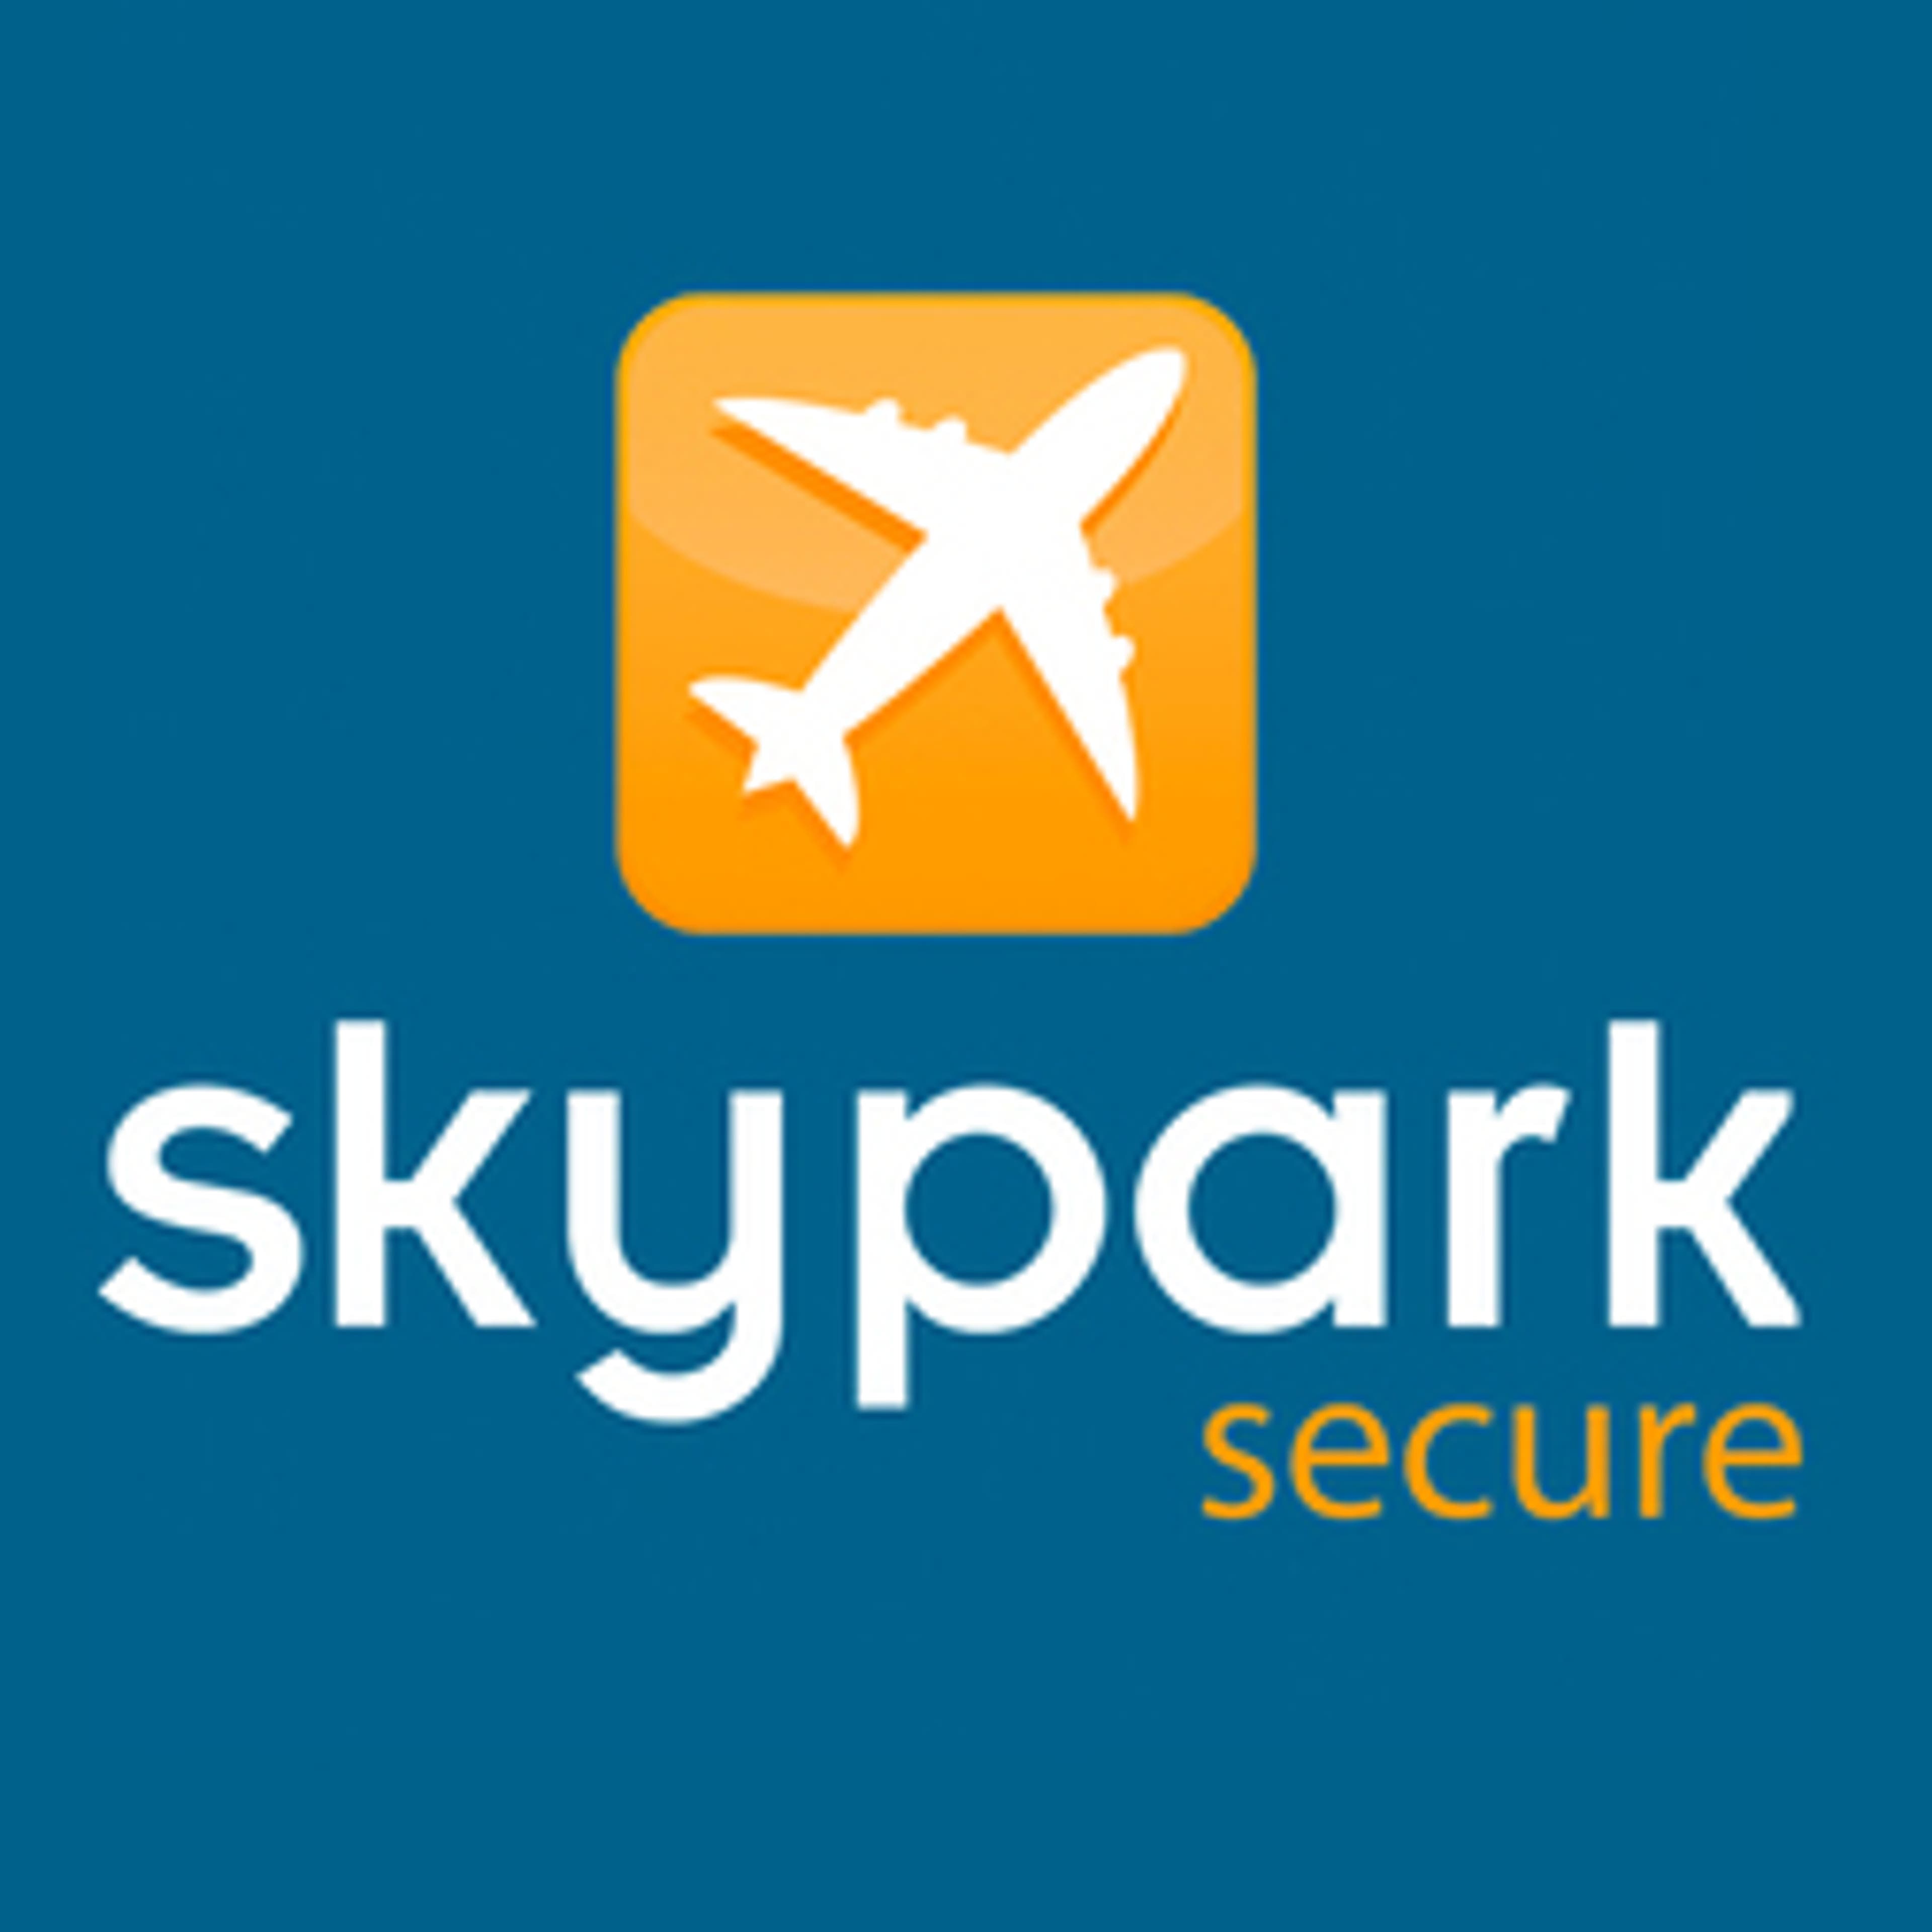  SkyParkSecure Airport Parking 